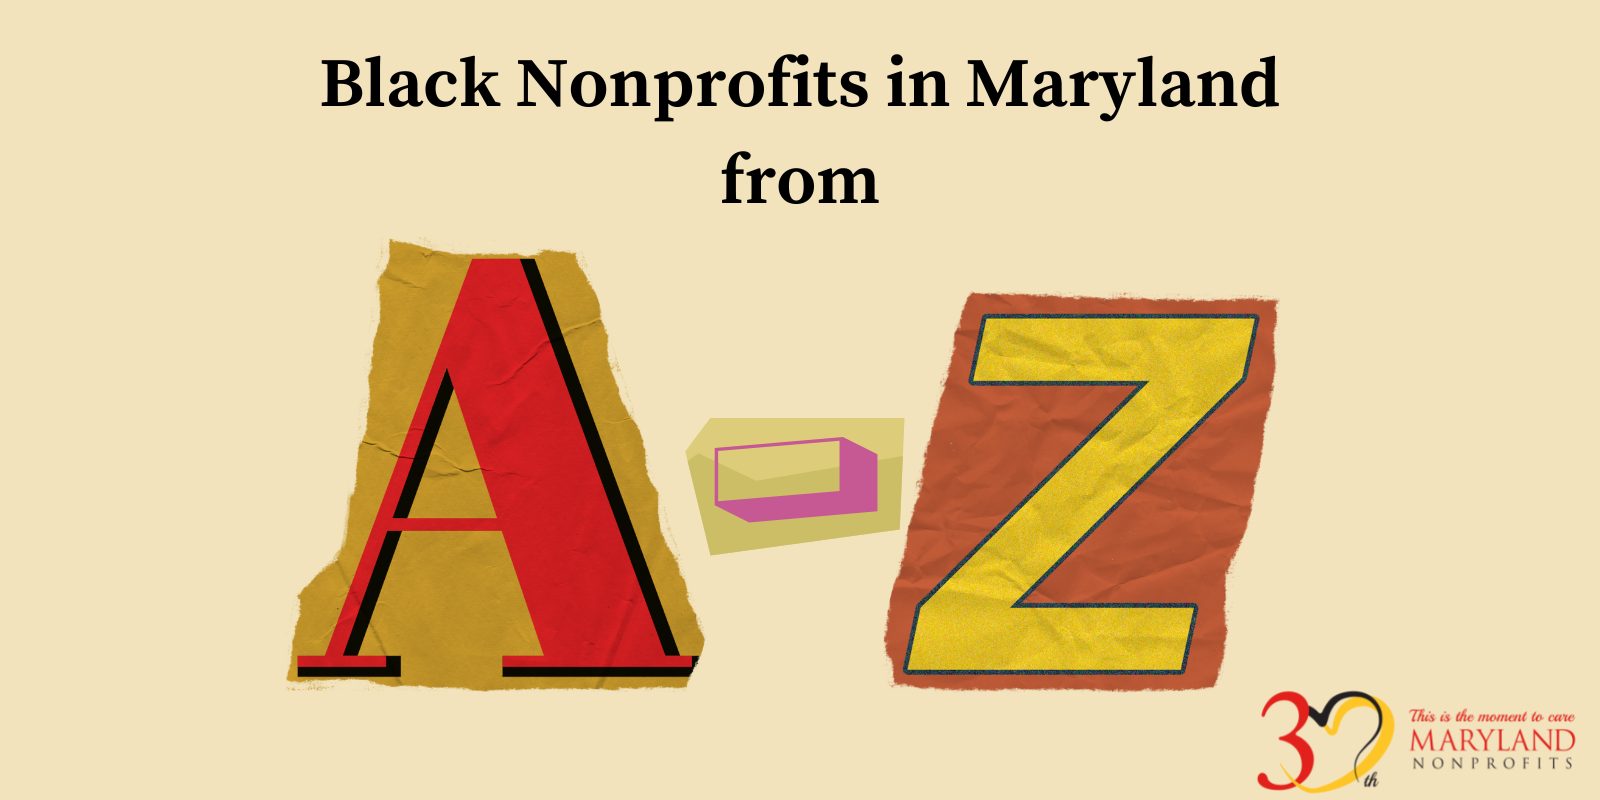 Black nonprofits in maryland from A-Z